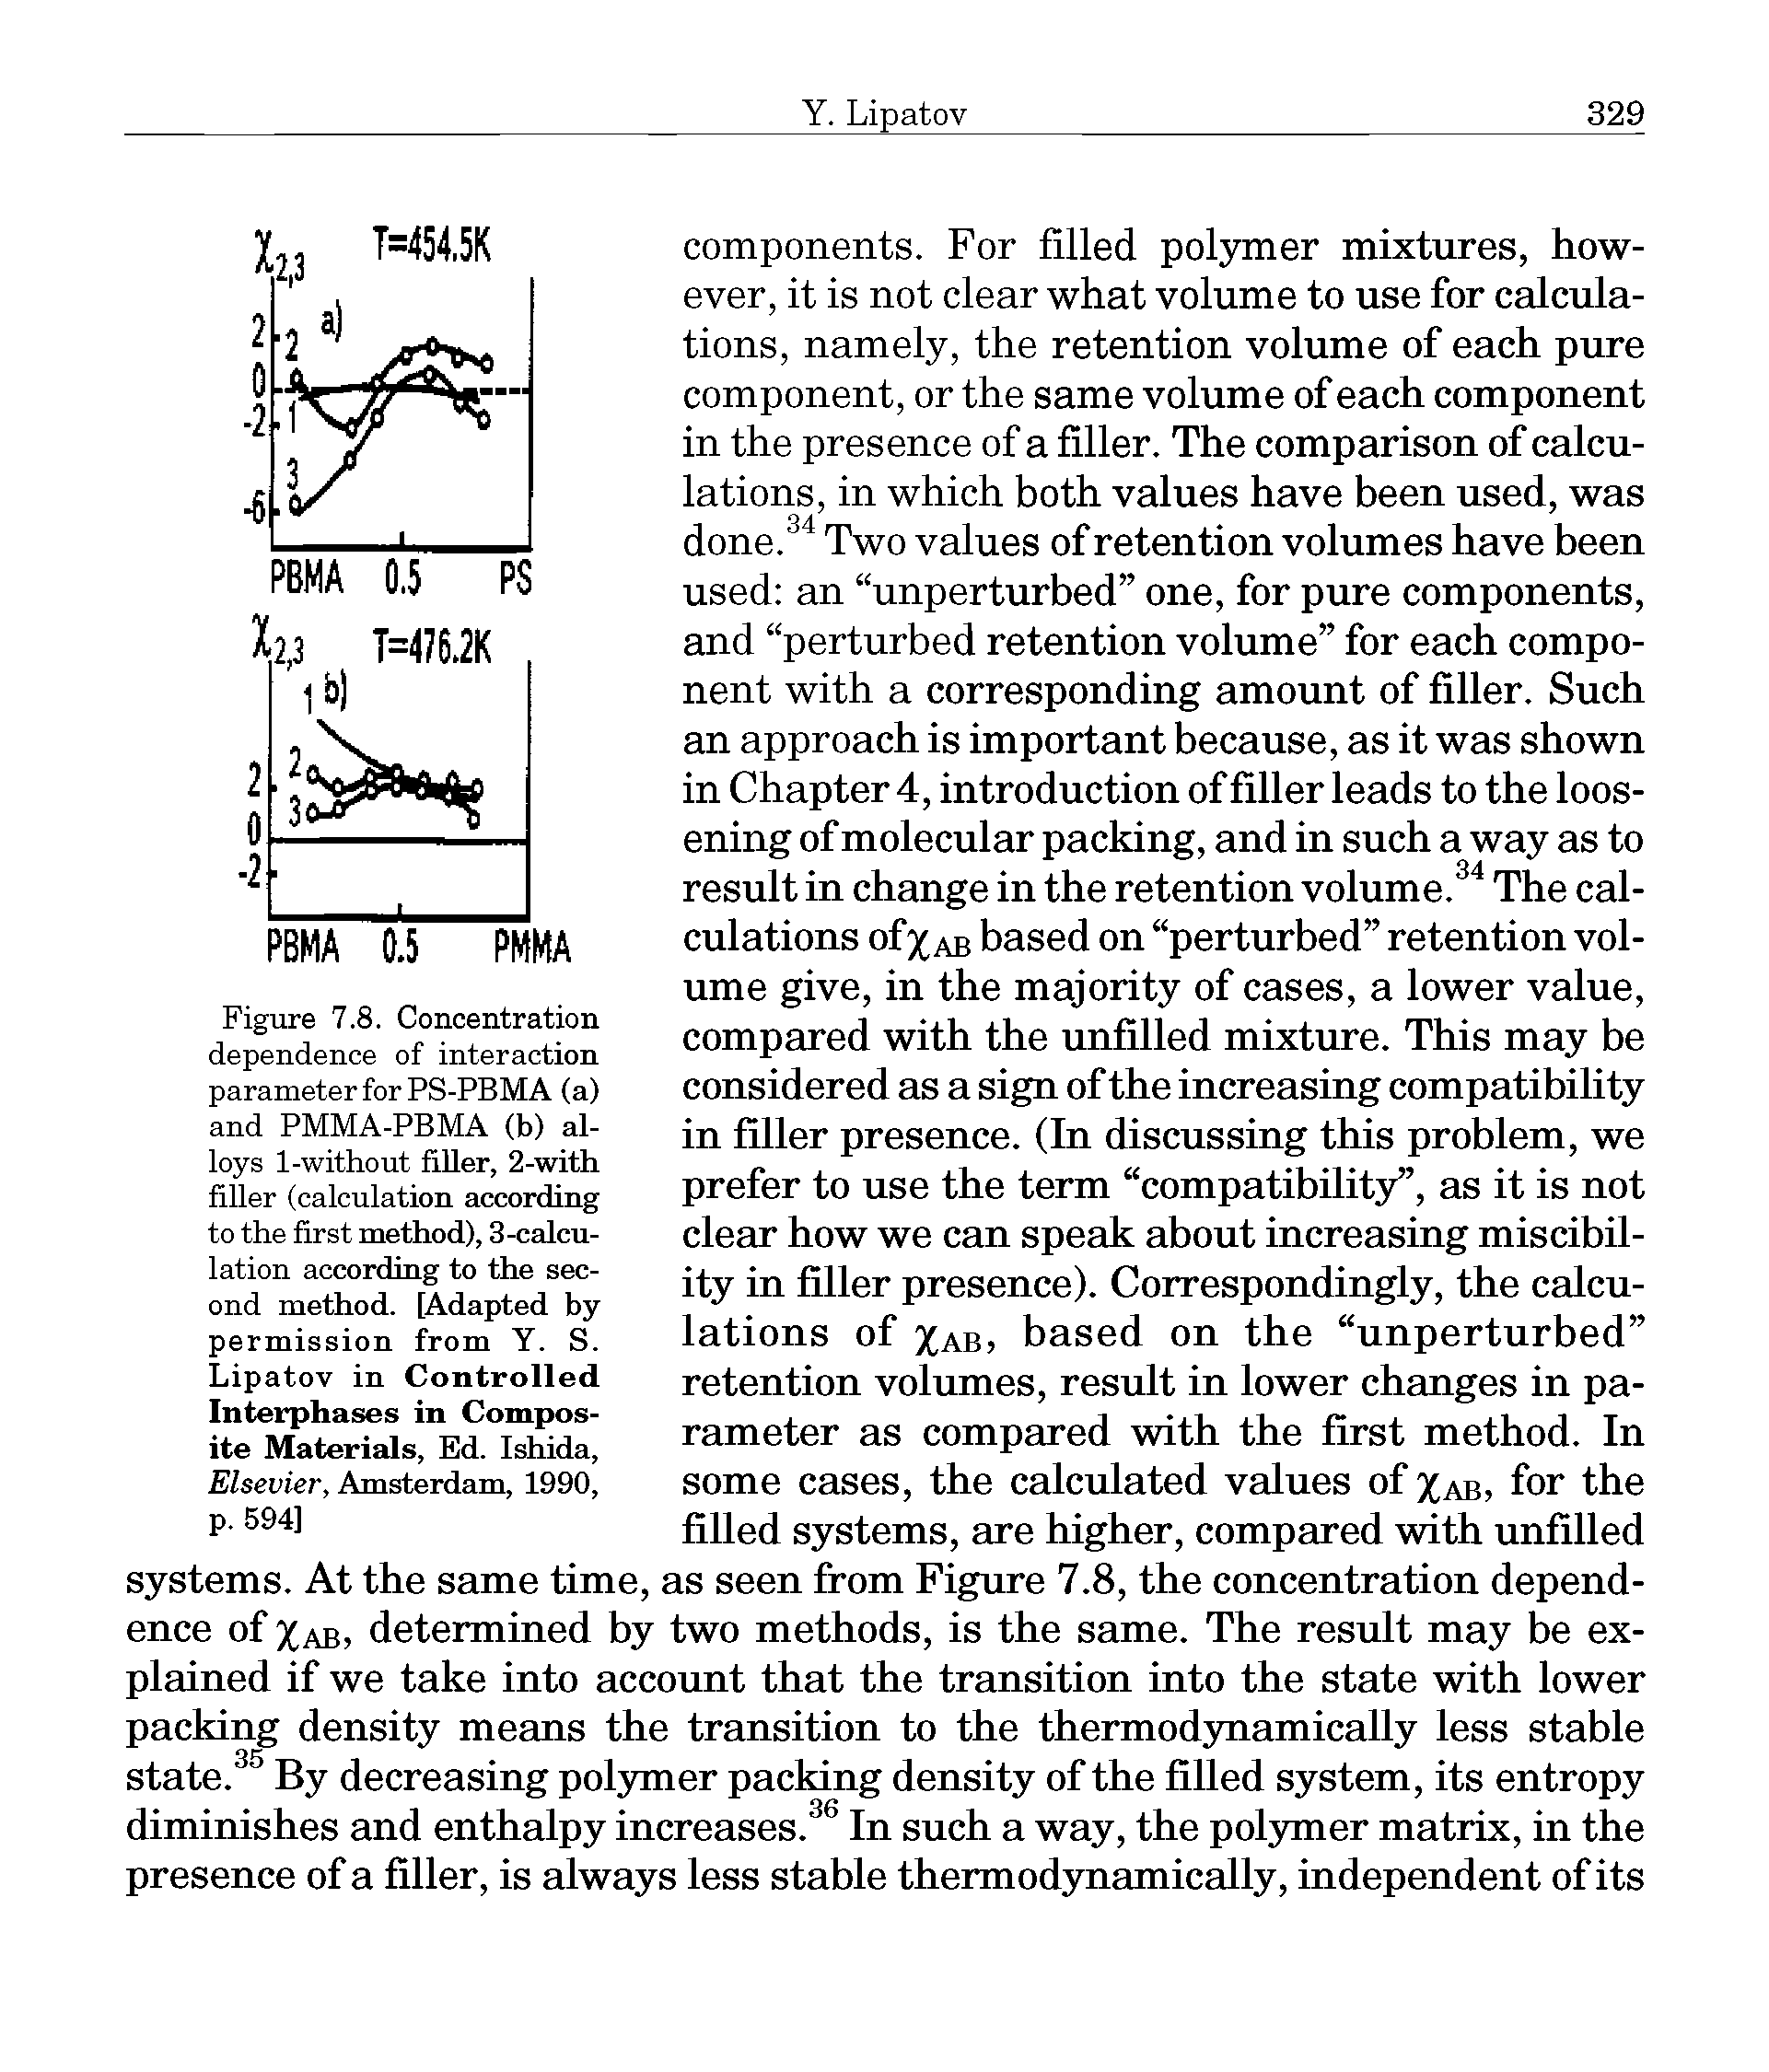 Figure 7.8. Concentration dependence of interaction parameter for PS-PBMA (a) and PMMA-PBMA (b) alloys 1-without filler, 2-with filler (calculation according to the first method), 3-calculation according to the second method. [Adapted by permission from Y. S. Lipatov in Controlled Interphases in Composite Materials, Ed. Ishida, Elsevier, Amsterdam, 1990, p. 594]...